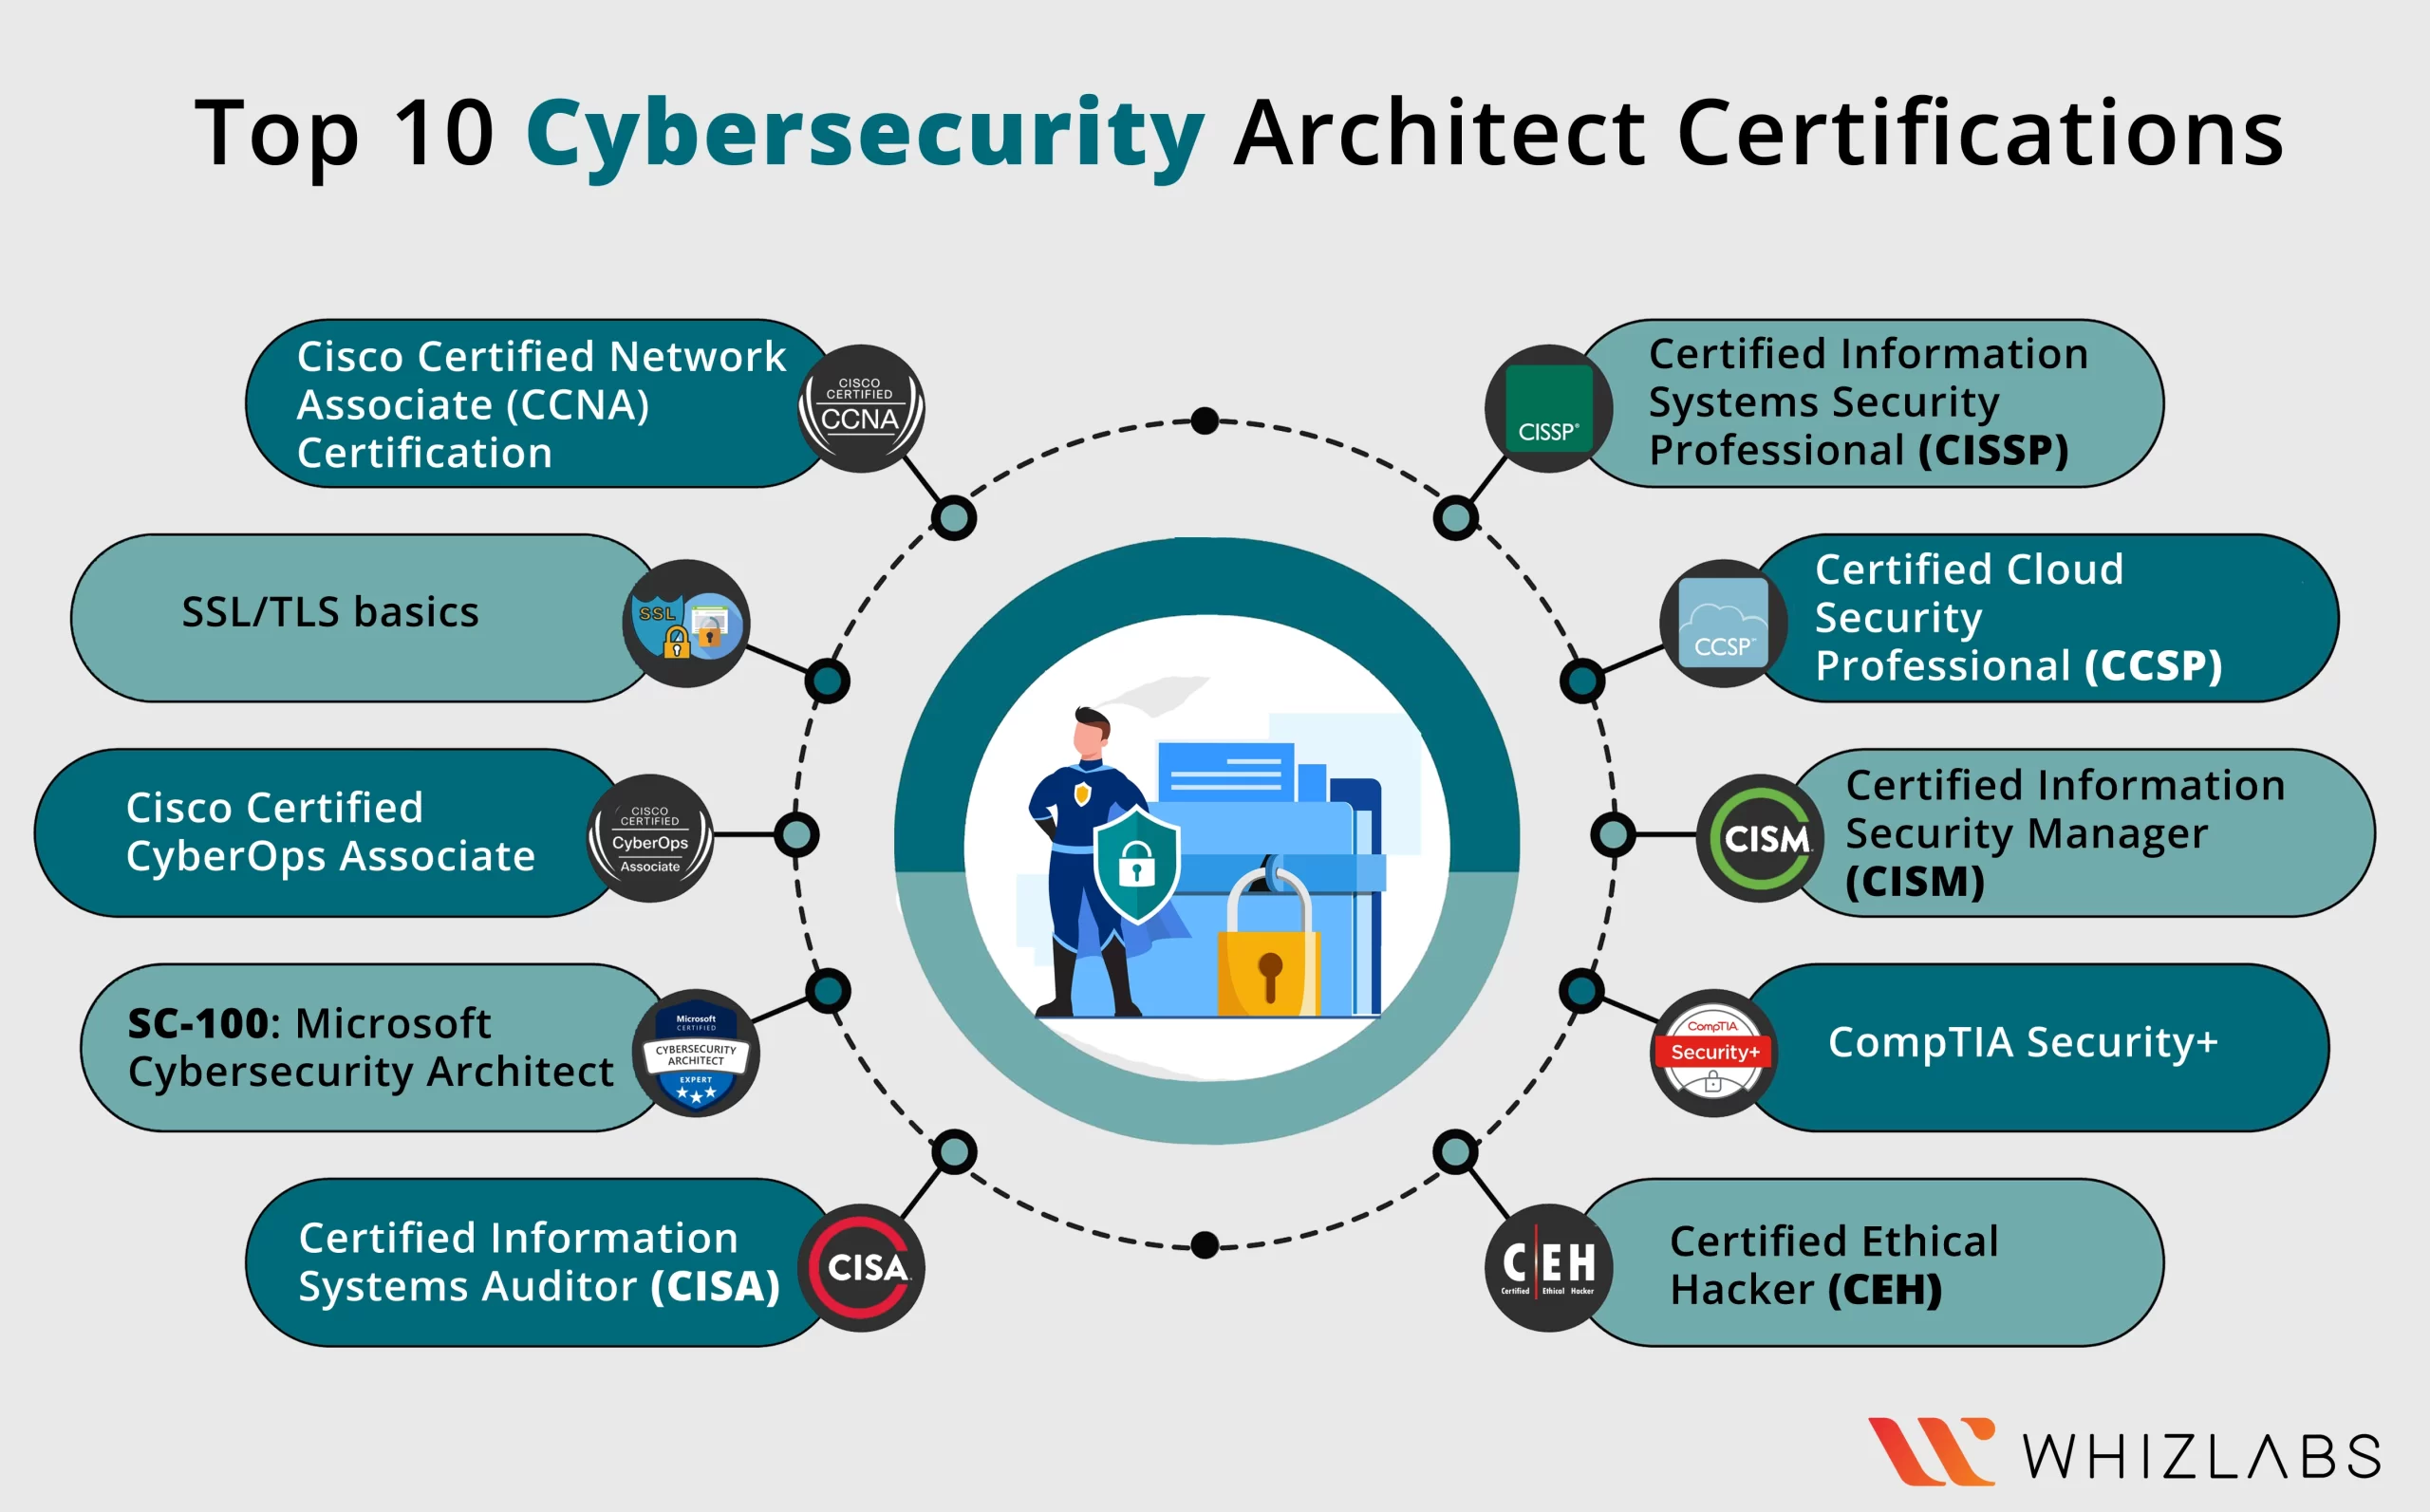 Cybersecurity Architect Certifications